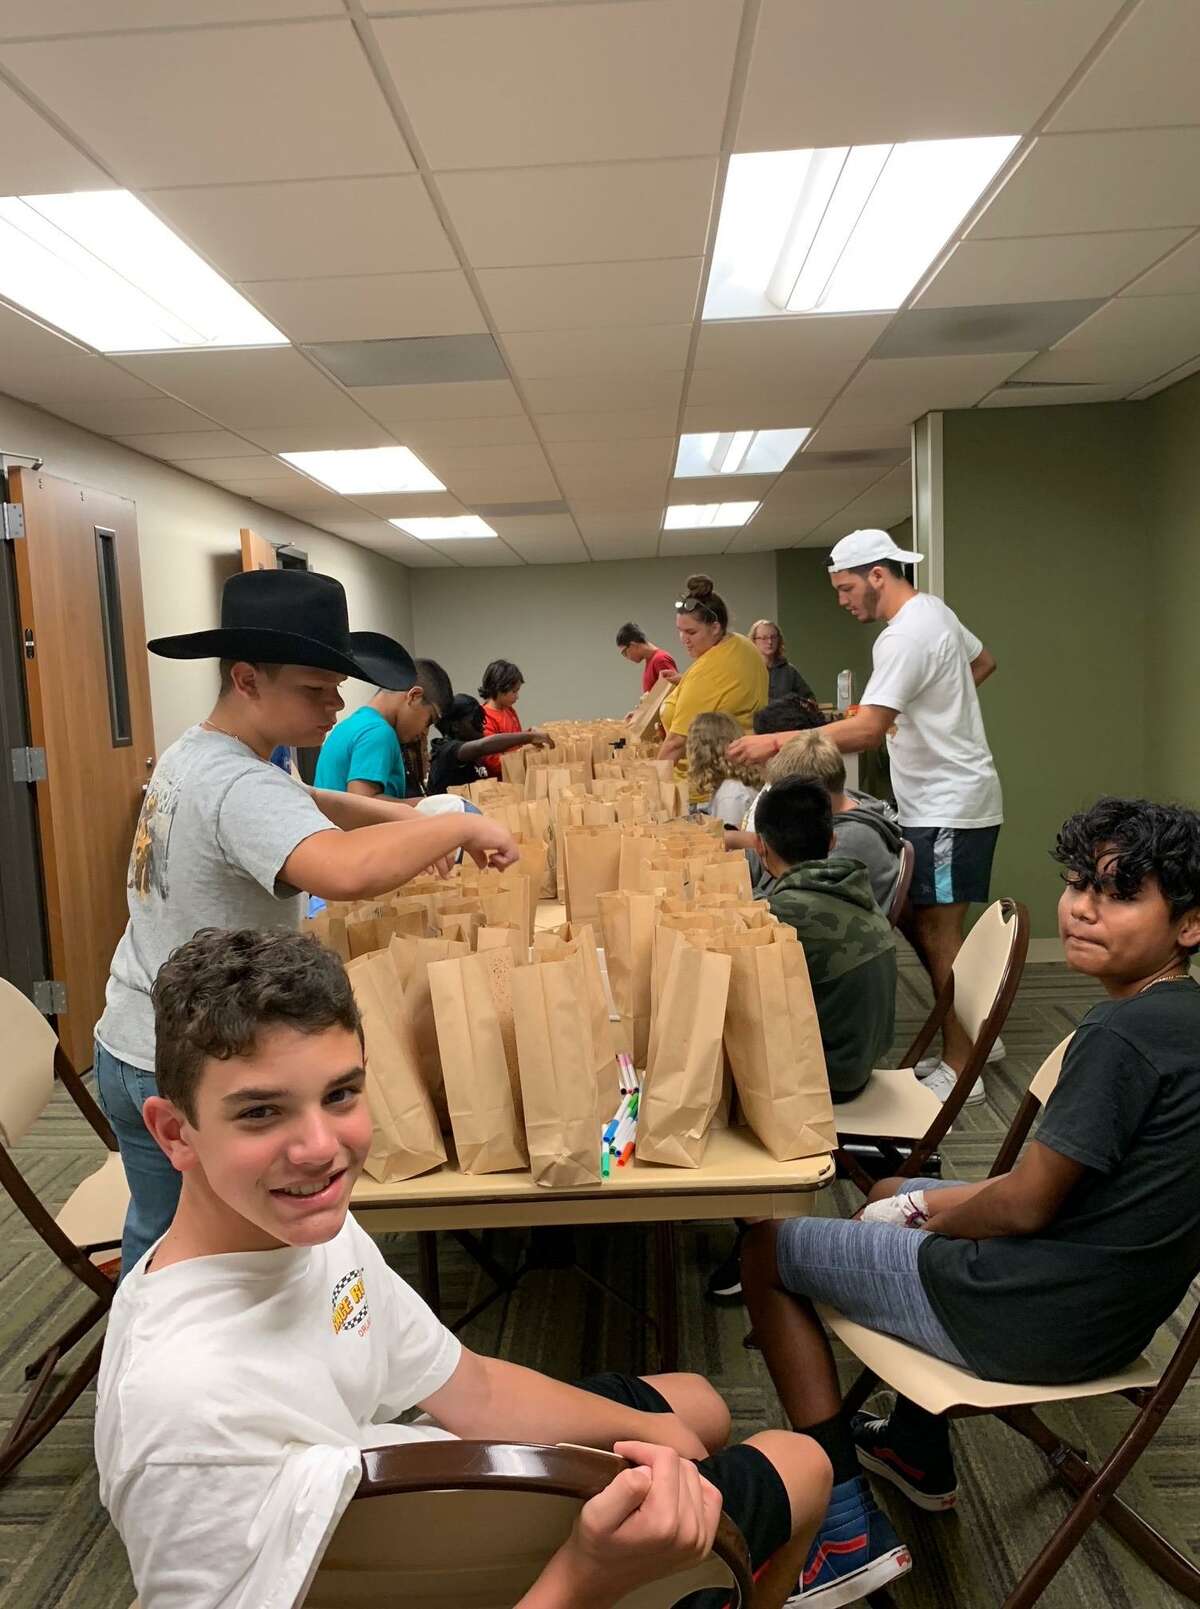 Service-loving teenagers in the Conroe recreation department's teen program decorated 200 bags with colorful drawing and positive phrases on Thursday and filled them with breakfast items for Montgomery County Meals on Wheels.